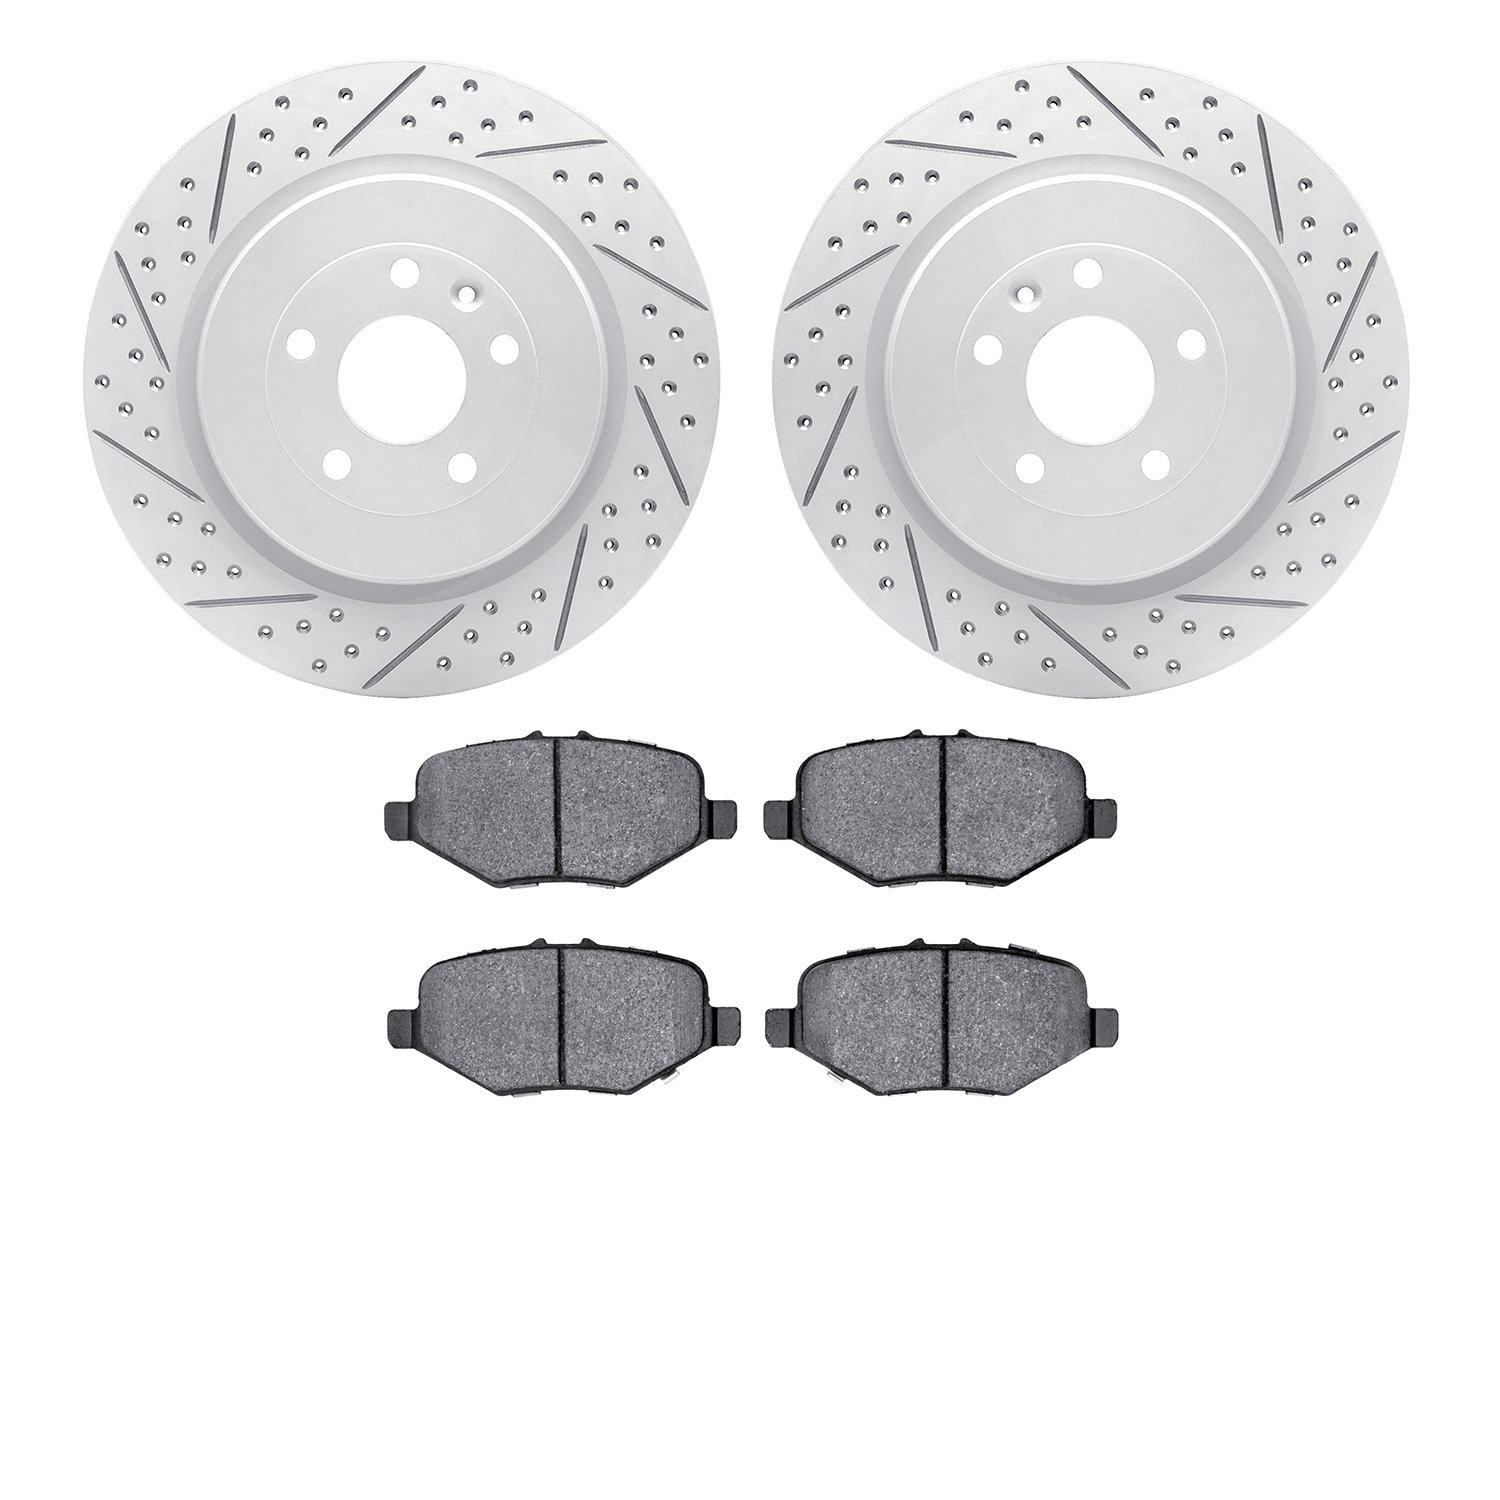 2202-99181 Geoperformance Drilled/Slotted Rotors w/Heavy-Duty Pads Kit, 2013-2019 Ford/Lincoln/Mercury/Mazda, Position: Rear